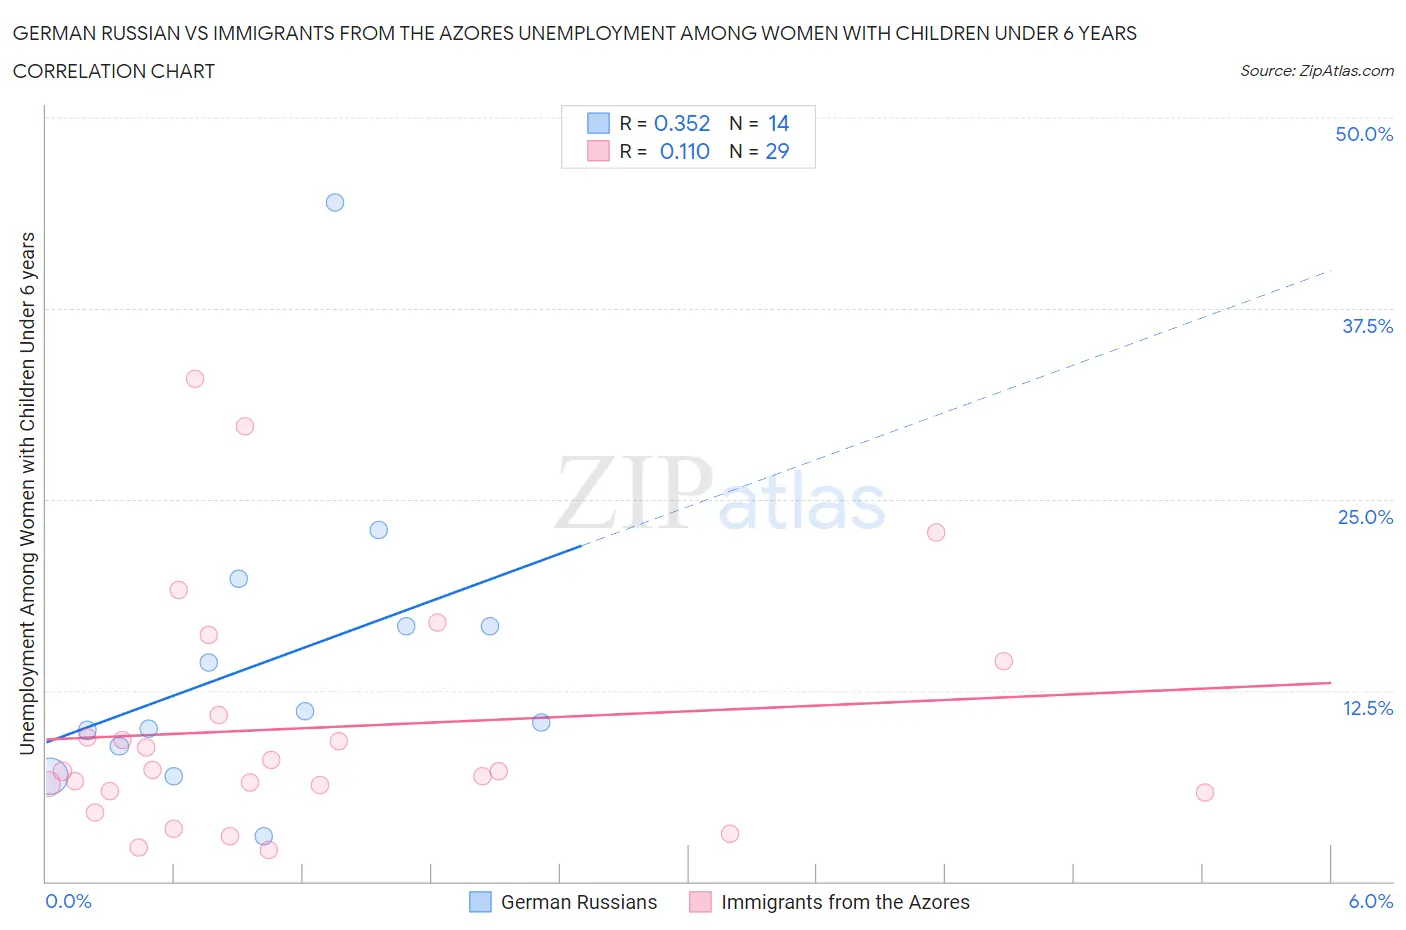 German Russian vs Immigrants from the Azores Unemployment Among Women with Children Under 6 years